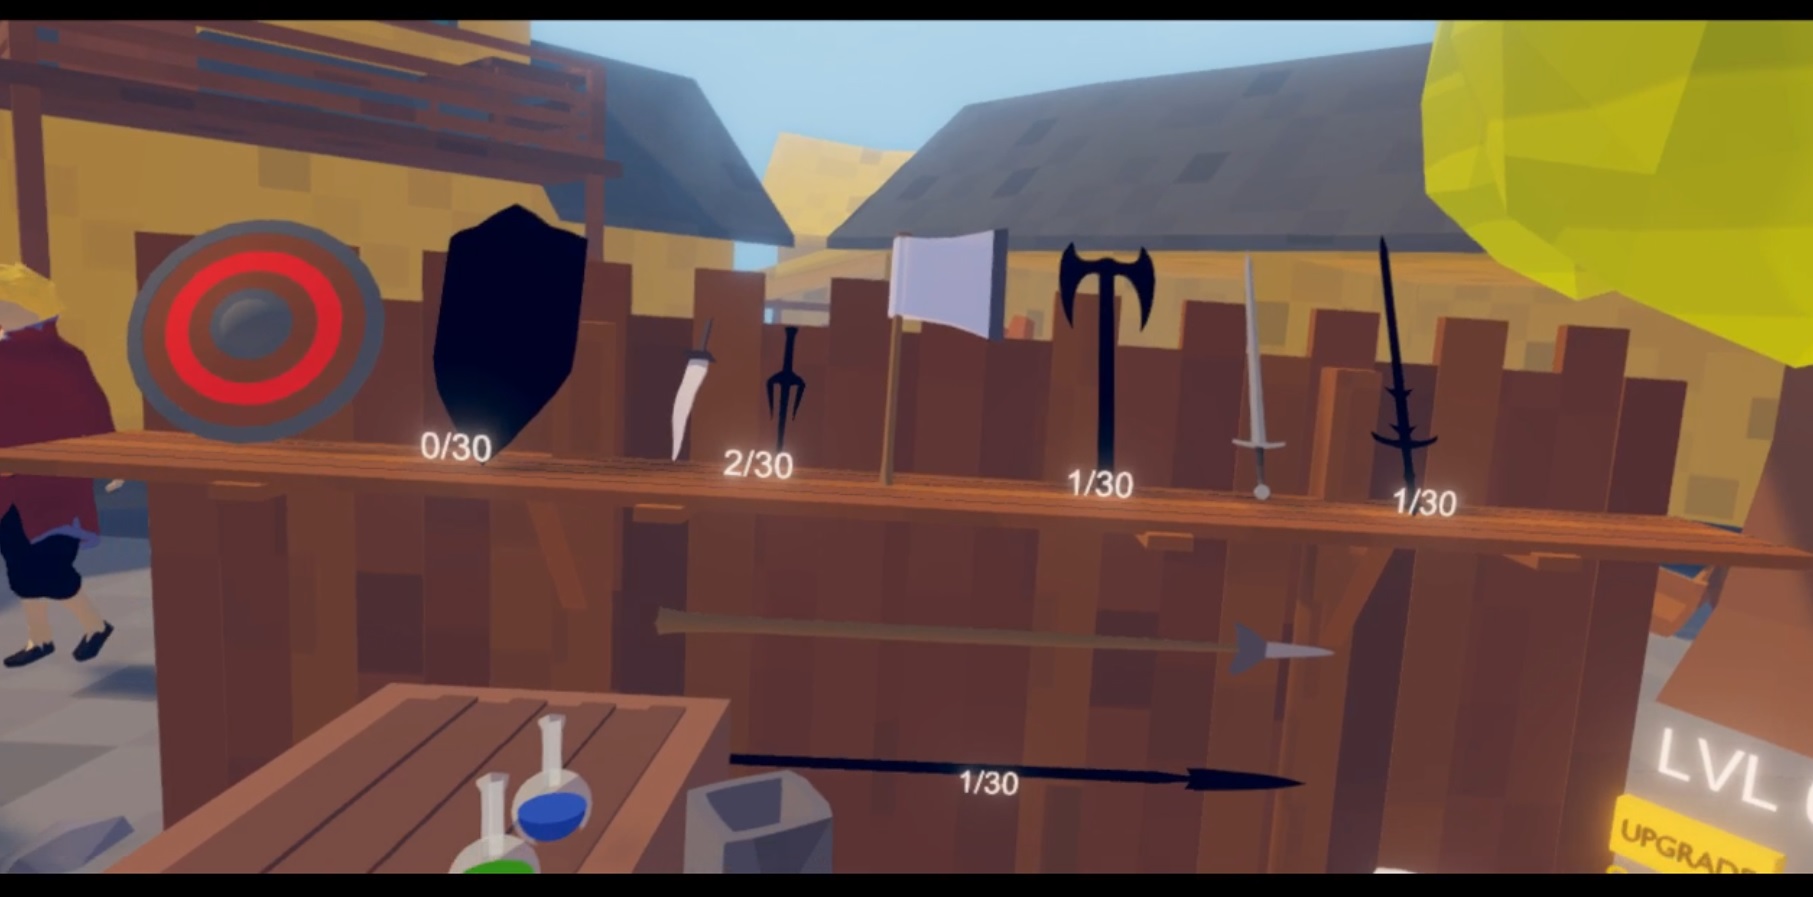 hammer and anvil vr